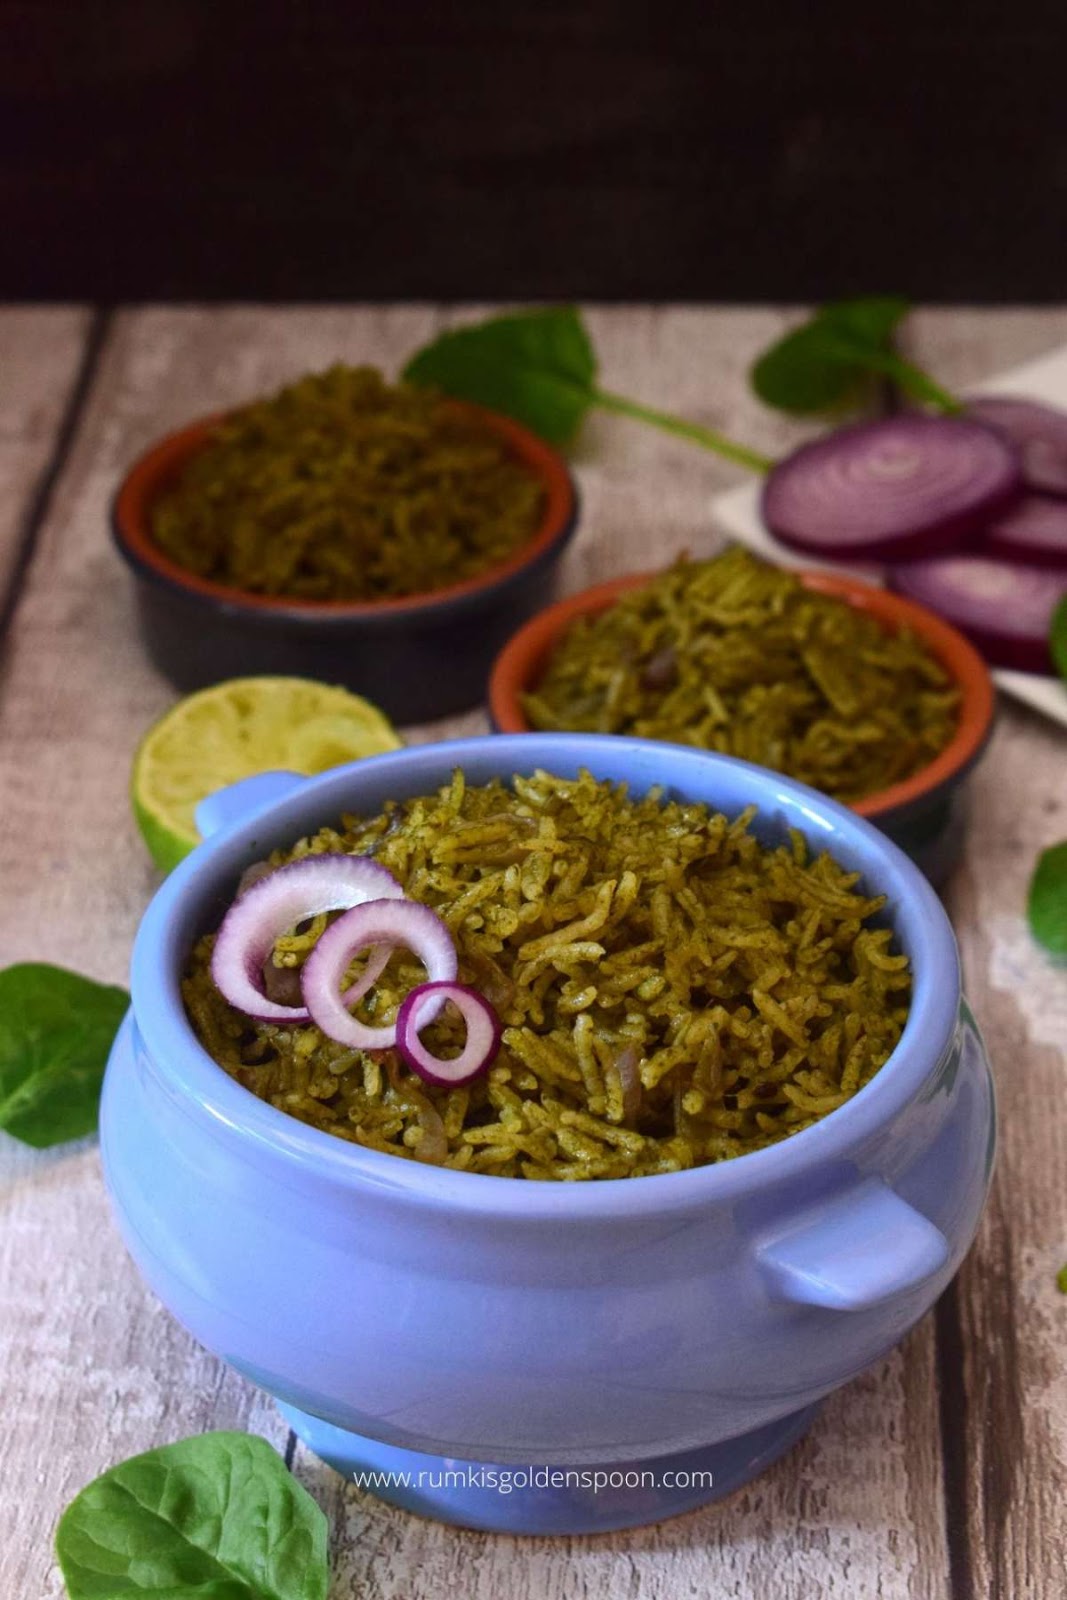 palak rice, palak rice recipe, recipe for palak rice, palak pulao, spinach rice, how to make palak rice, palak pulao recipe, recipe for palak pulao, spinach rice recipe, how to prepare palak rice, palak rice bath, spinach pulao, palak fried rice, palak rice for babies, how to do palak rice, how to make palak pulao, spinach rice recipe indian, palak rice step by step, spinach rice indian, how to make spinach rice, spinach pulao recipe, spinach rice pilaf, rice recipes, rice recipe, with rice recipe, rice recipe vegan, rice recipe vegetarian, rice recipes veg, rice recipe with vegetables, rice recipe Indian, rice recipes indian, Indian rice recipe easy, Rumki's Golden Spoon